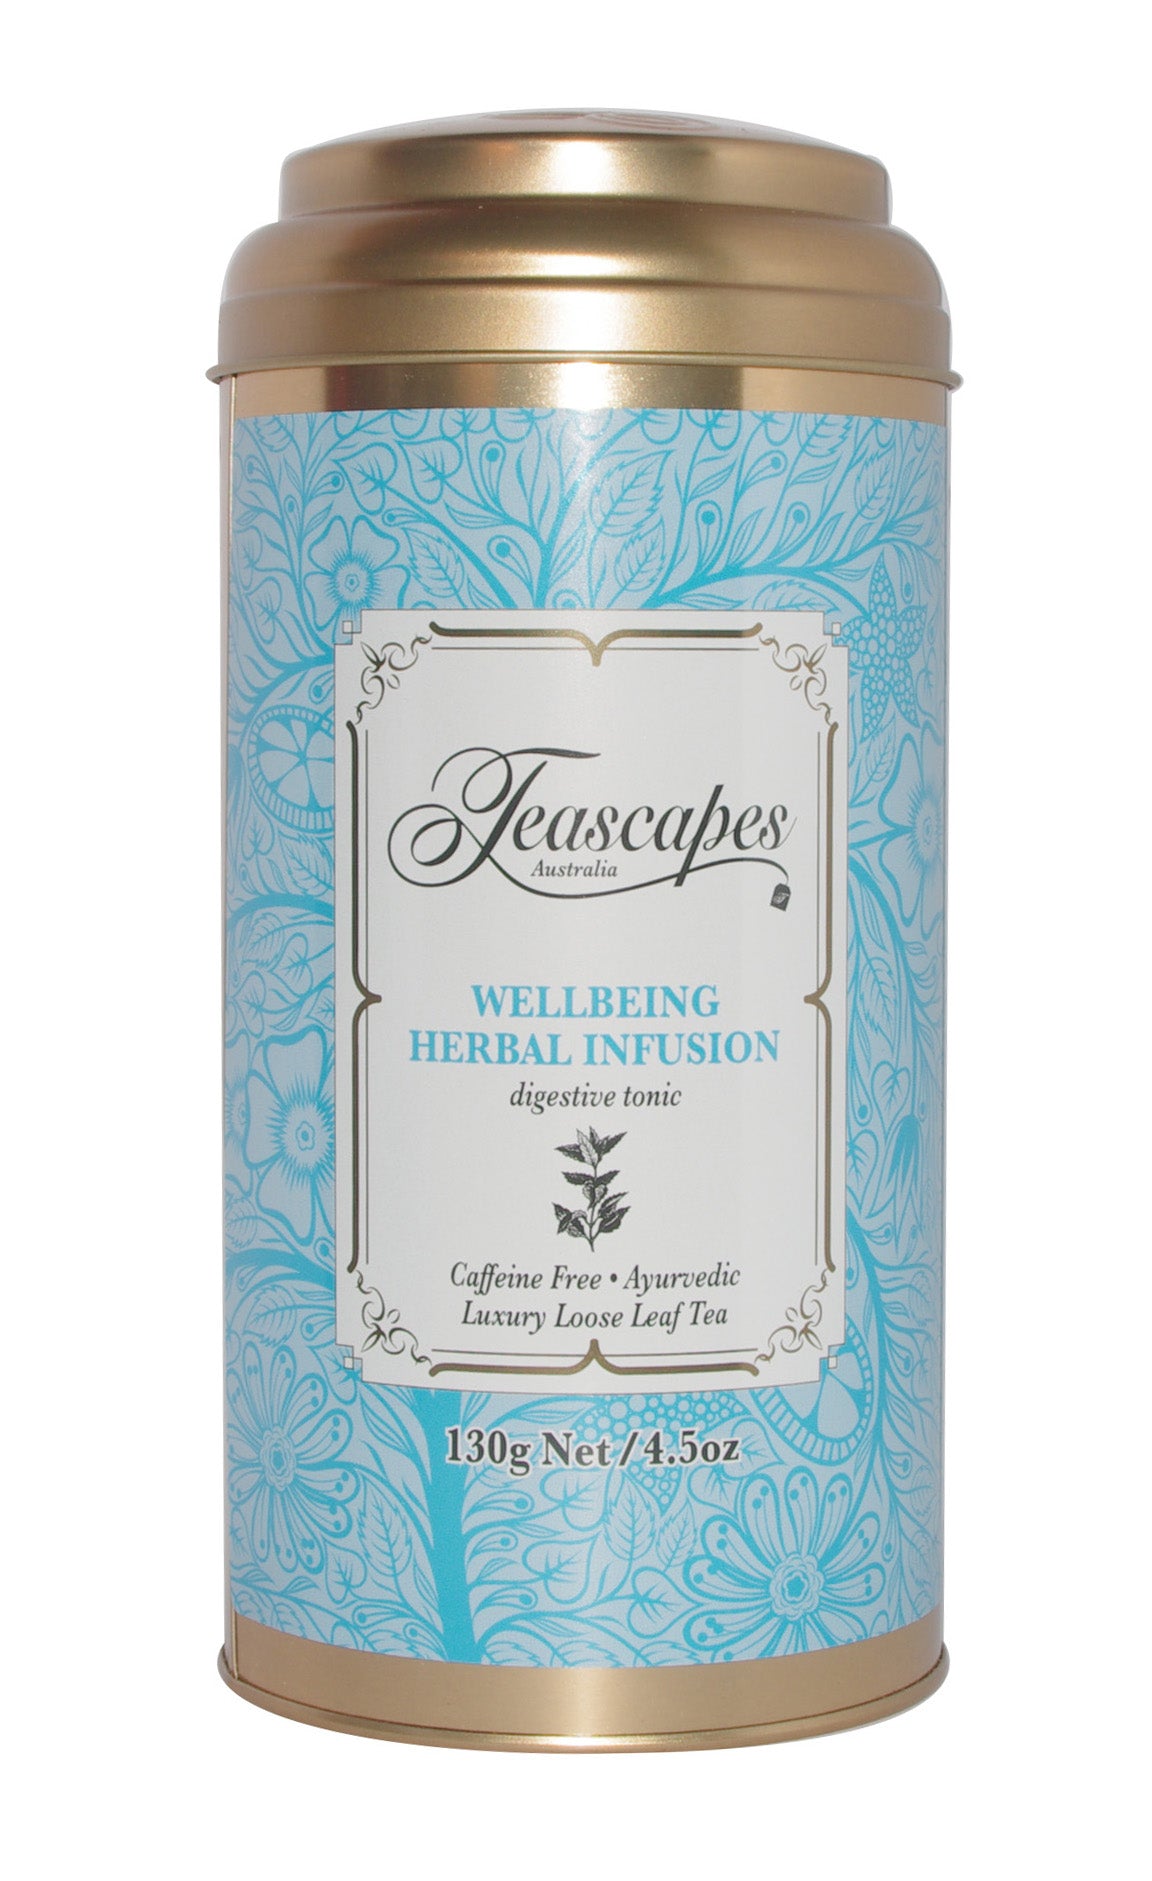 Wellbeing Herbal Infusion 130g Tin